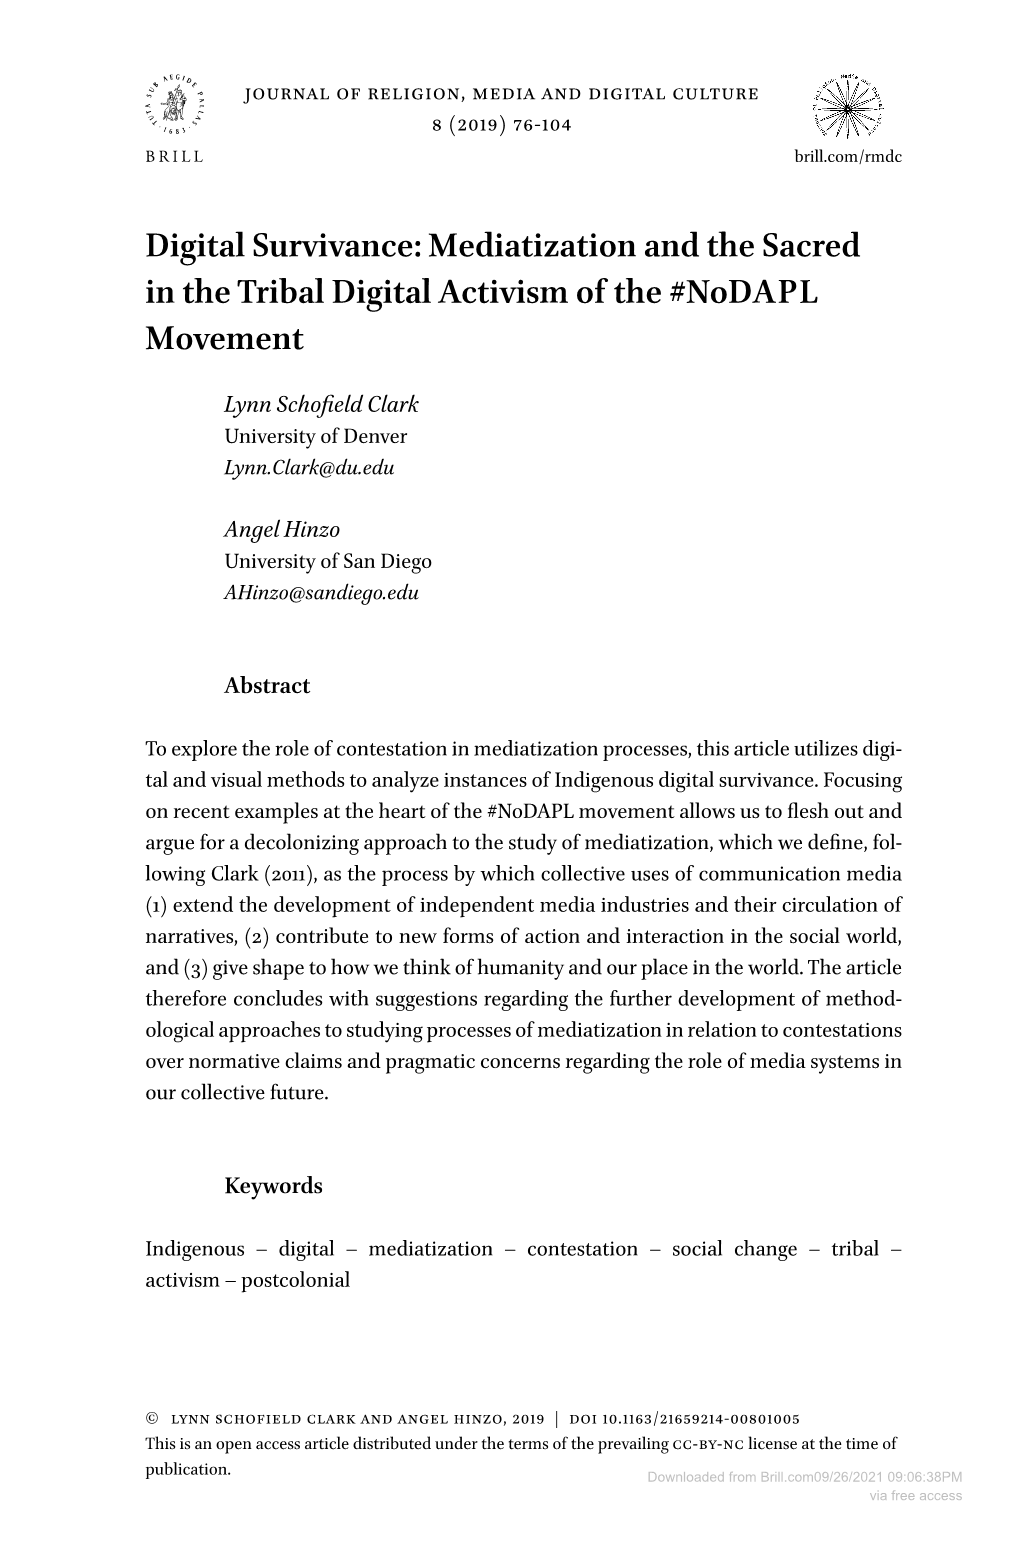 Digital Survivance: Mediatization and the Sacred in the Tribal Digital Activism of the #Nodapl Movement